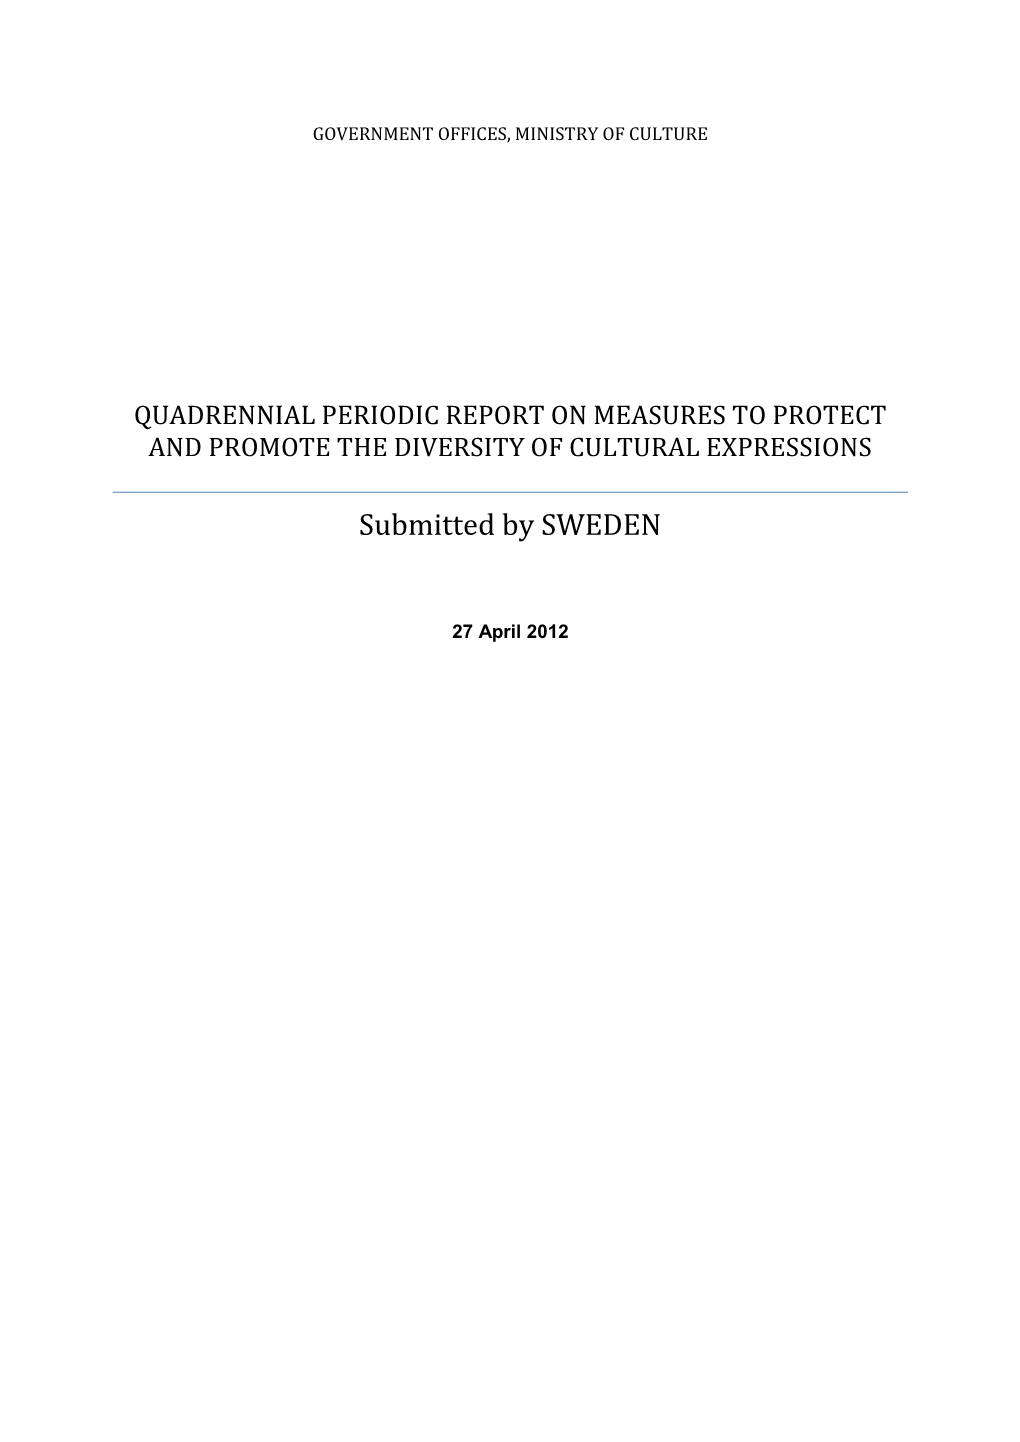 Quadrennial Periodic Report on Measures to Protect and Promote the Diversity of Cultural Expressions